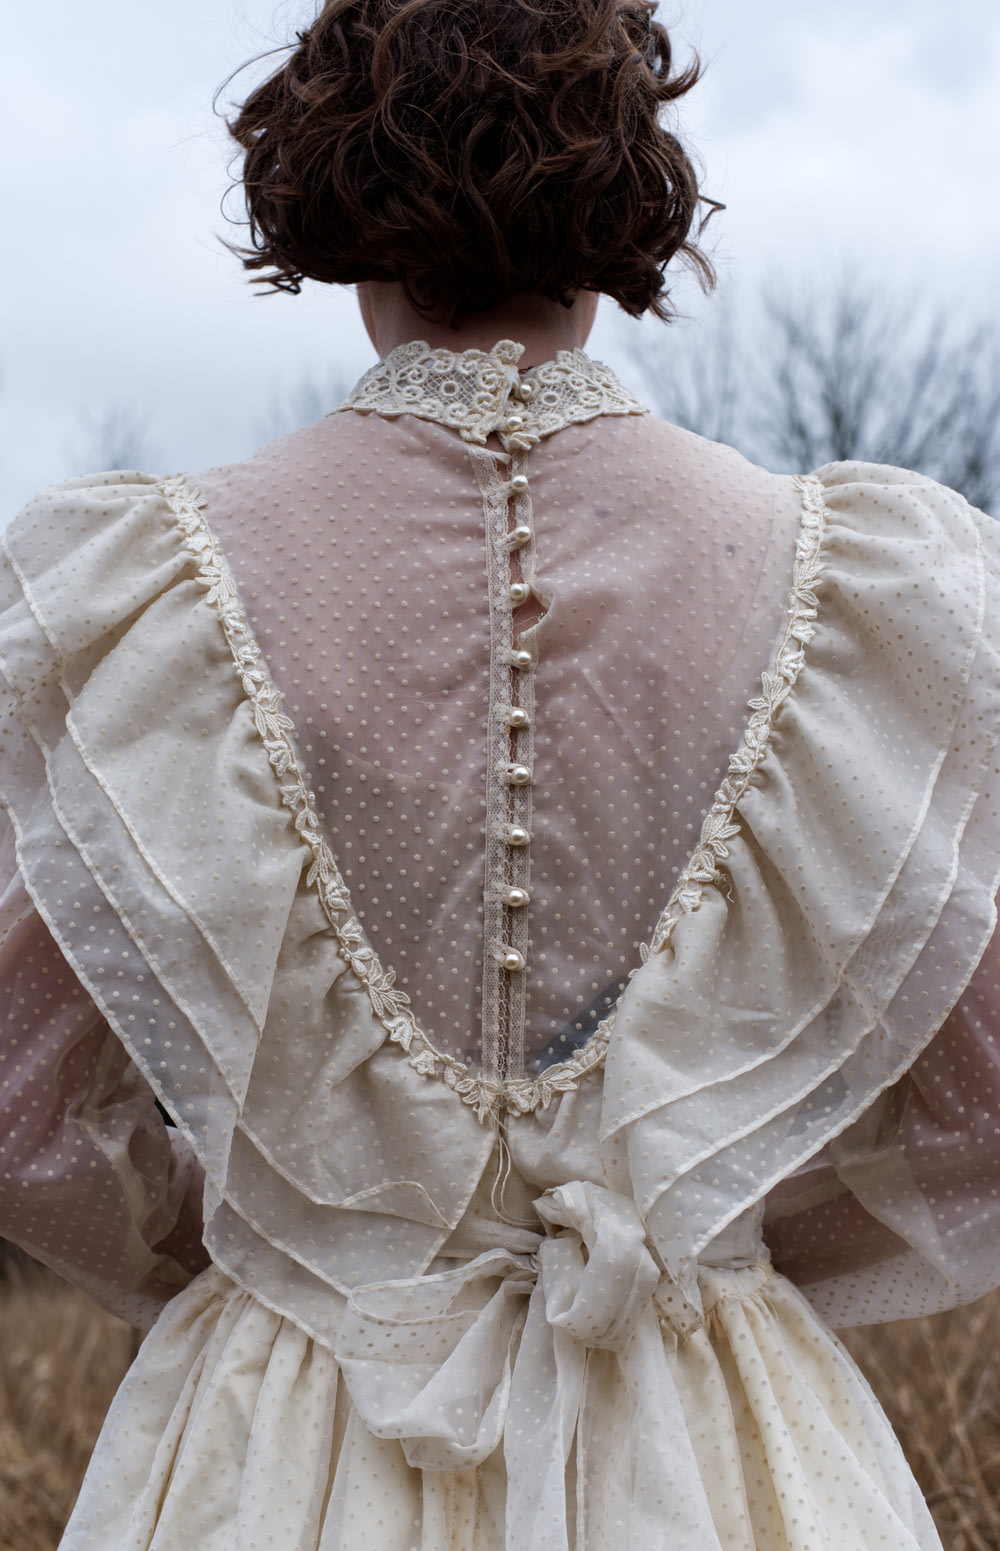 the back of a woman's dress in a field